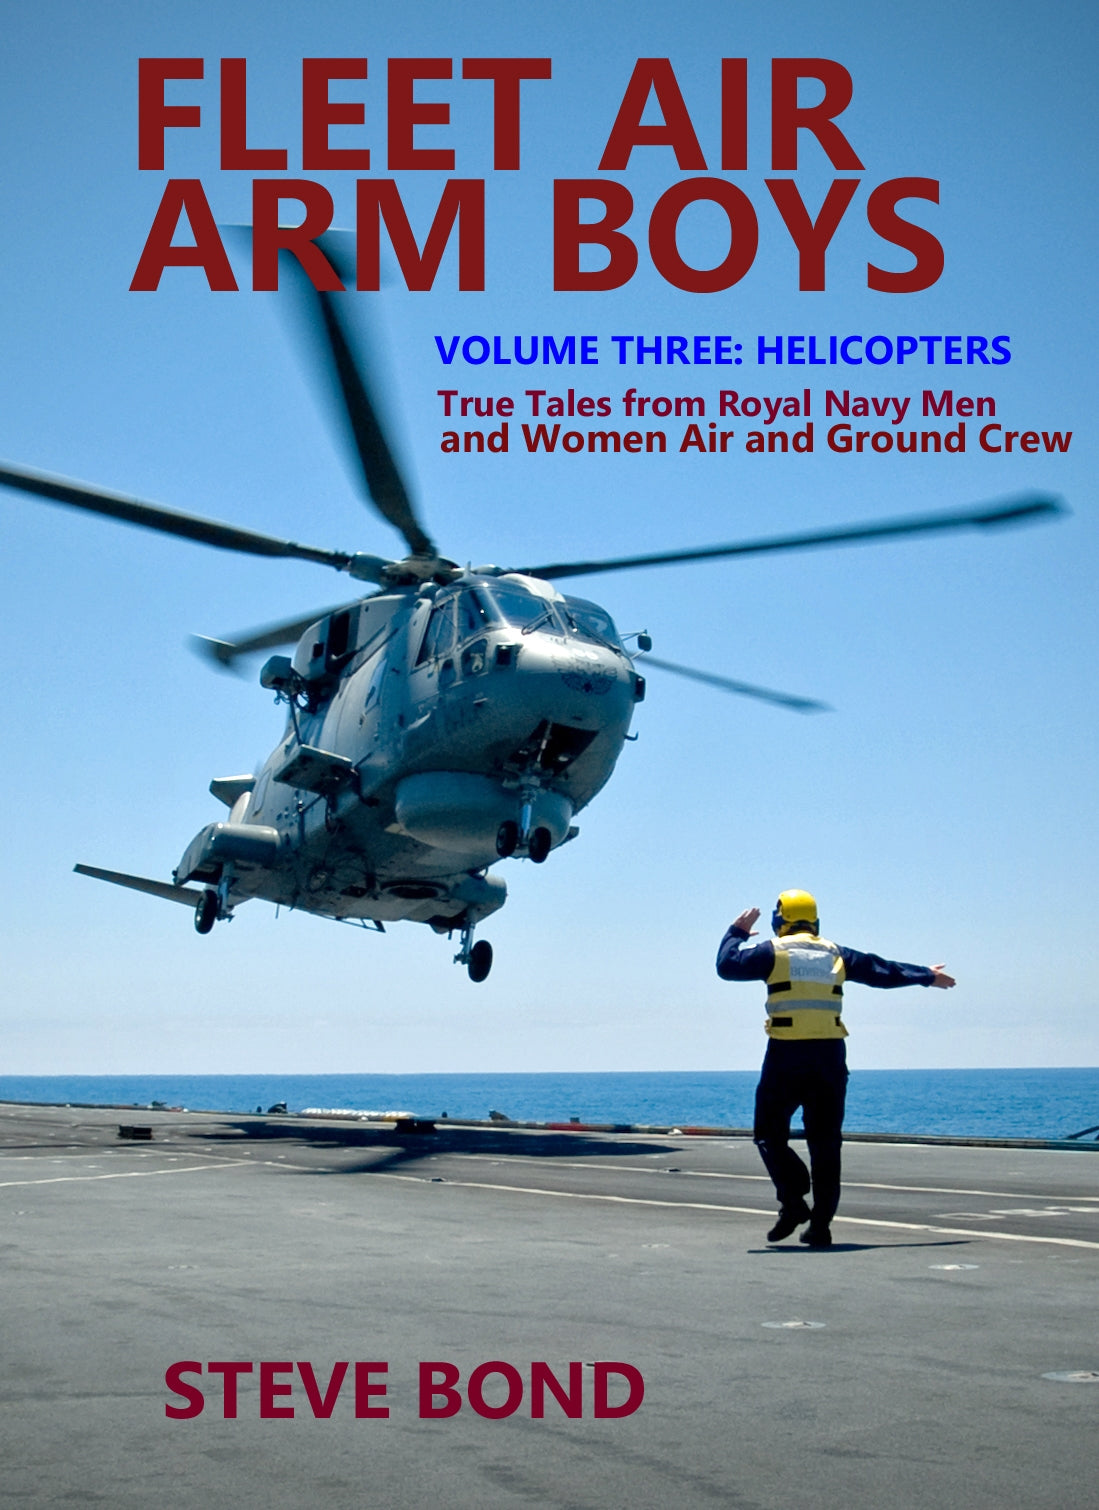 Fleet Air Arm Boys: True Tales from Royal Navy Men and Women Air and Ground Crew